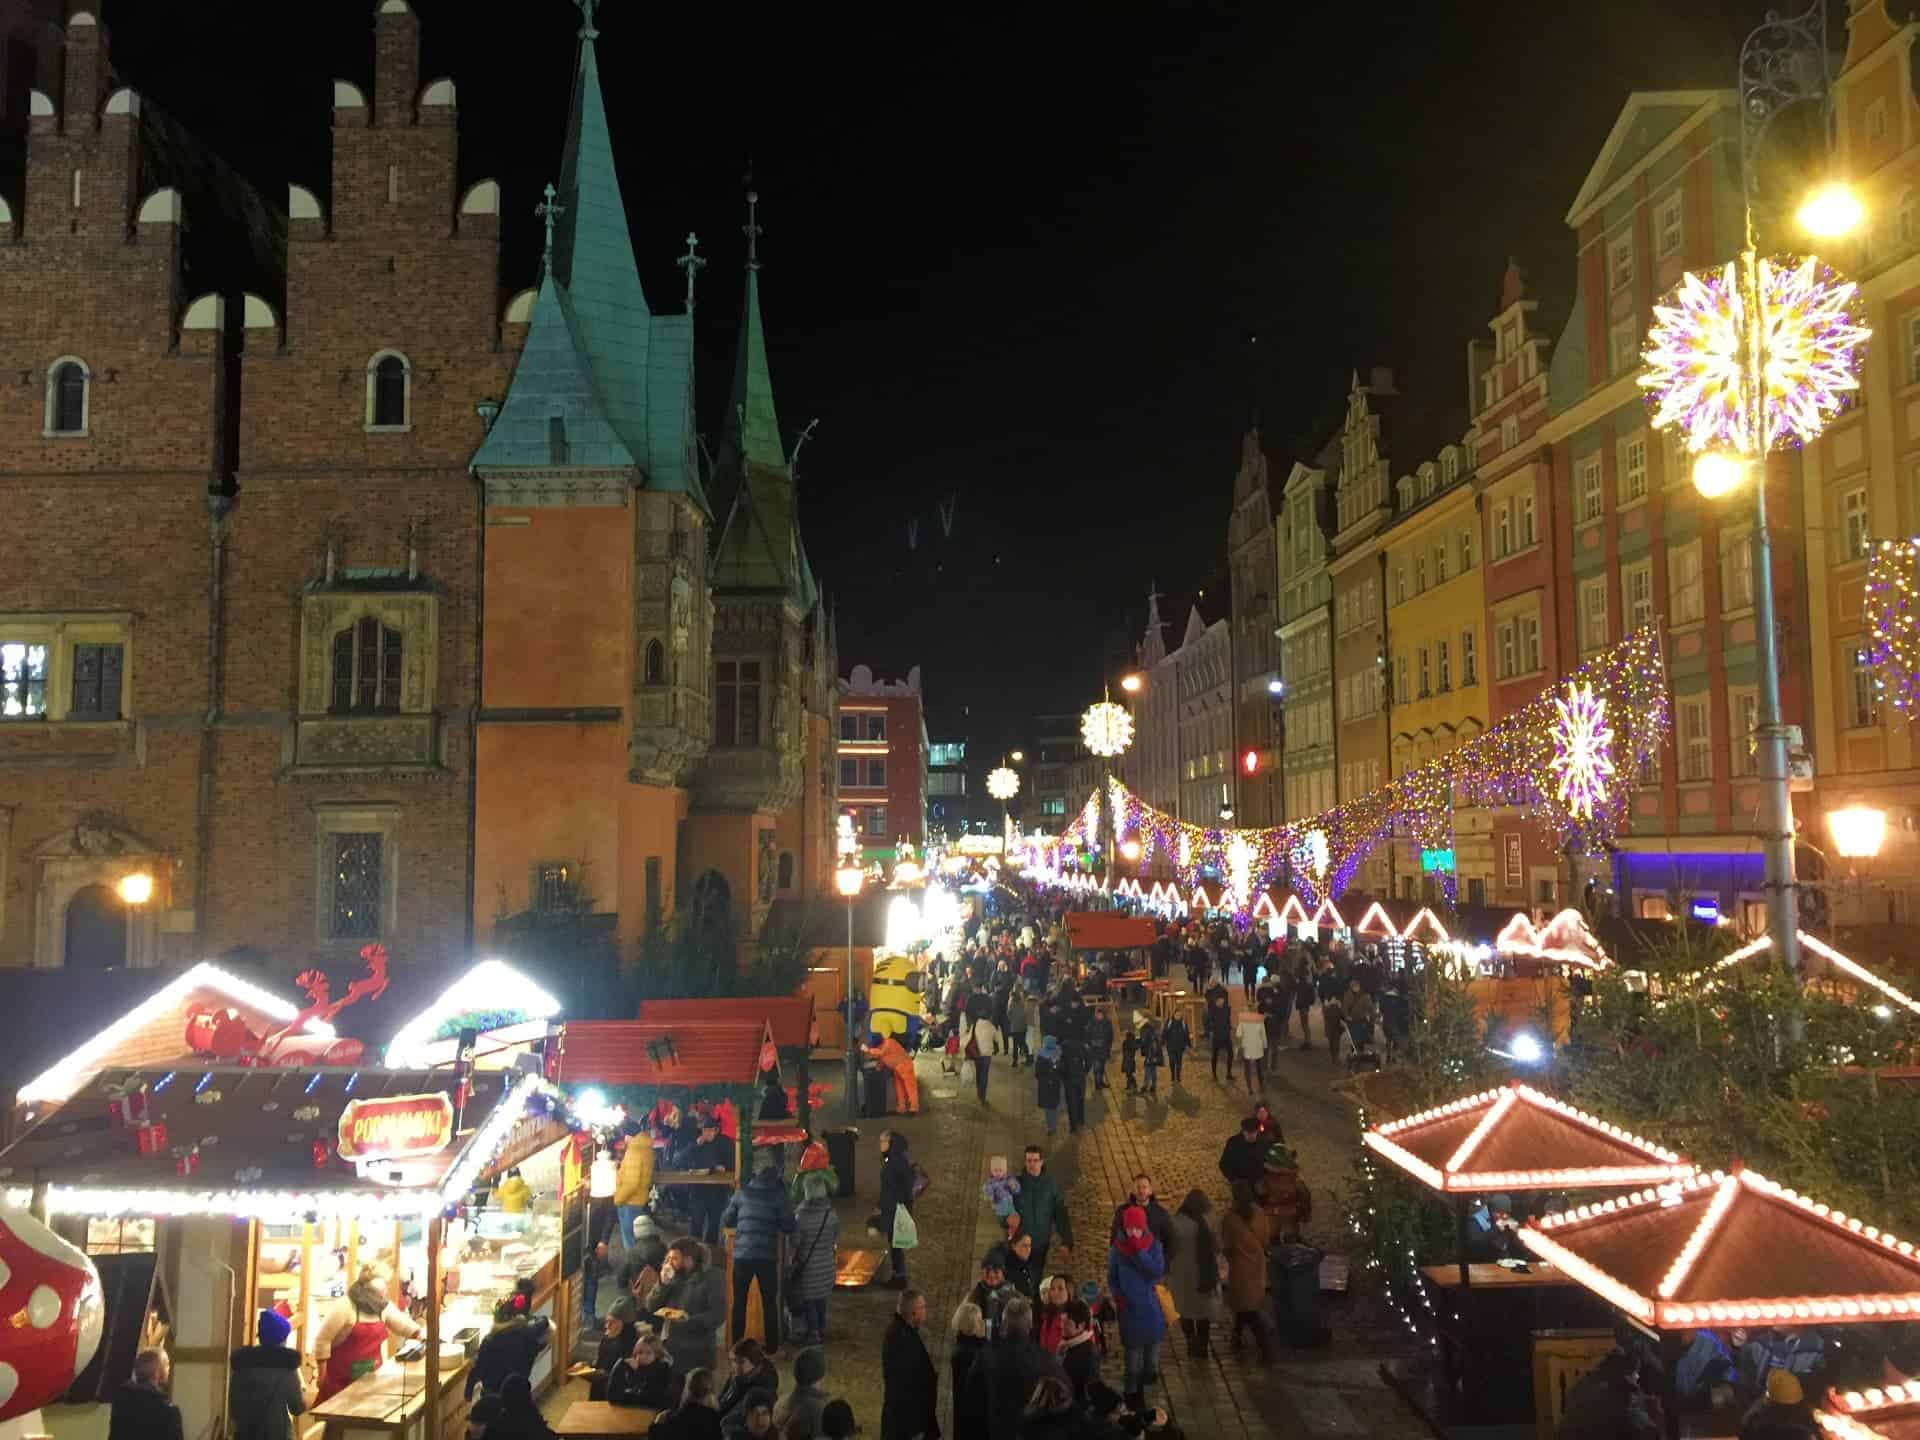 Wroclaw Christmas Market Europe’s Most Underrated Festive Destination?